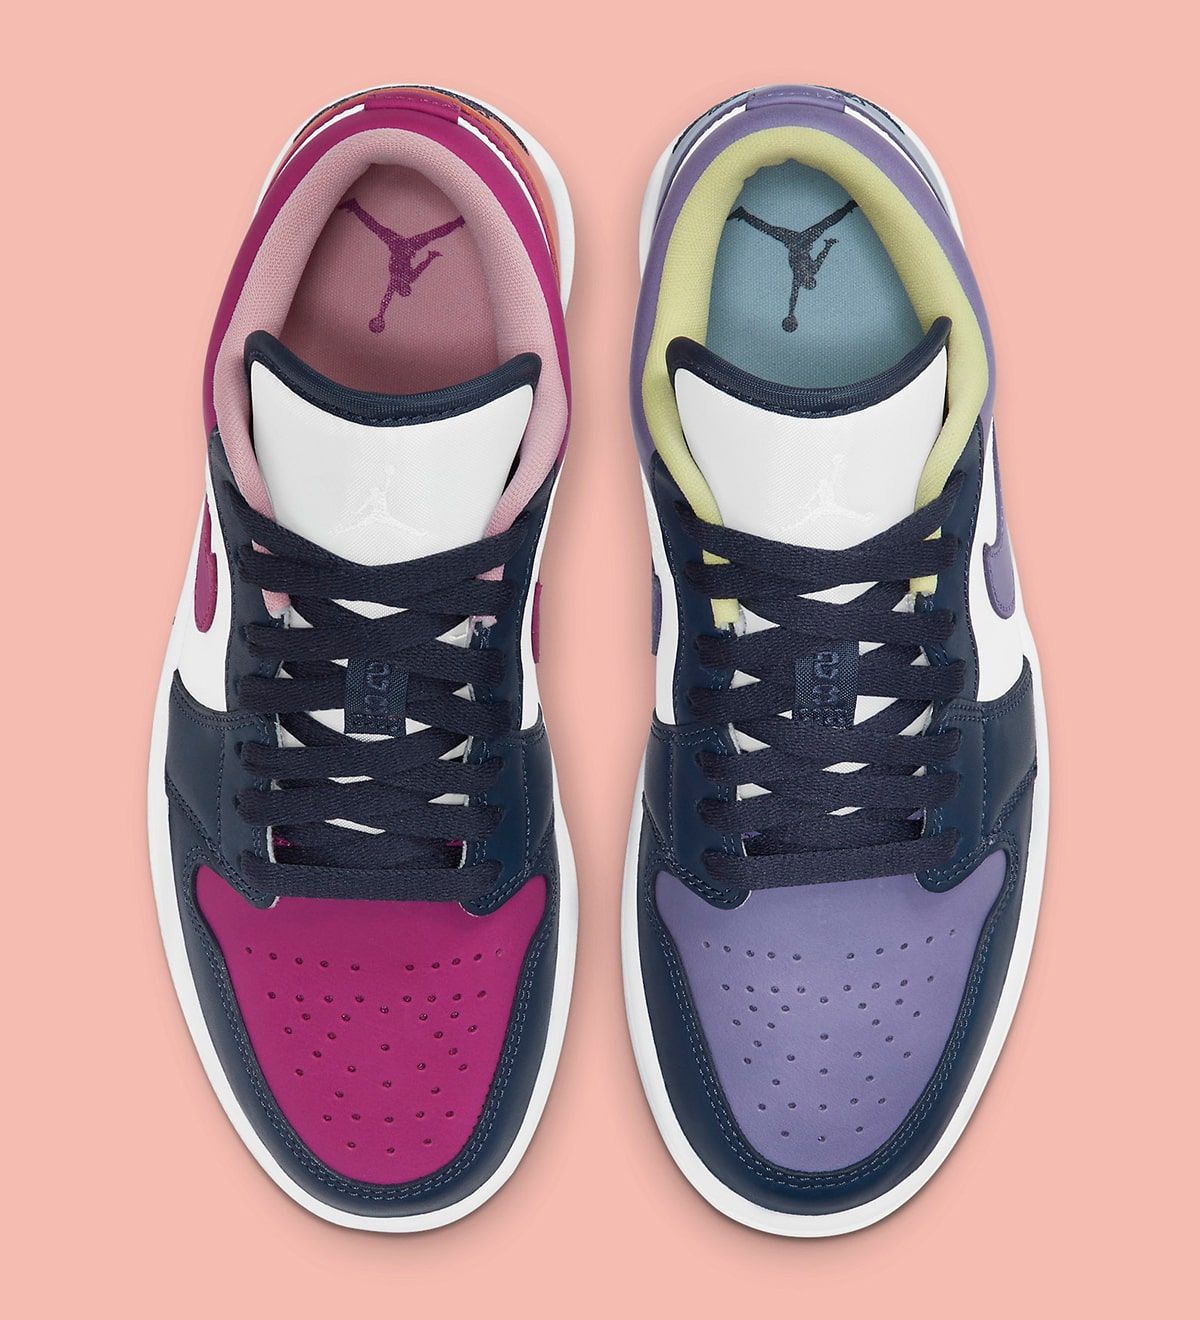 The Air Jordan 1 Low Appears with Mismatched Muted Hues | HOUSE OF ...